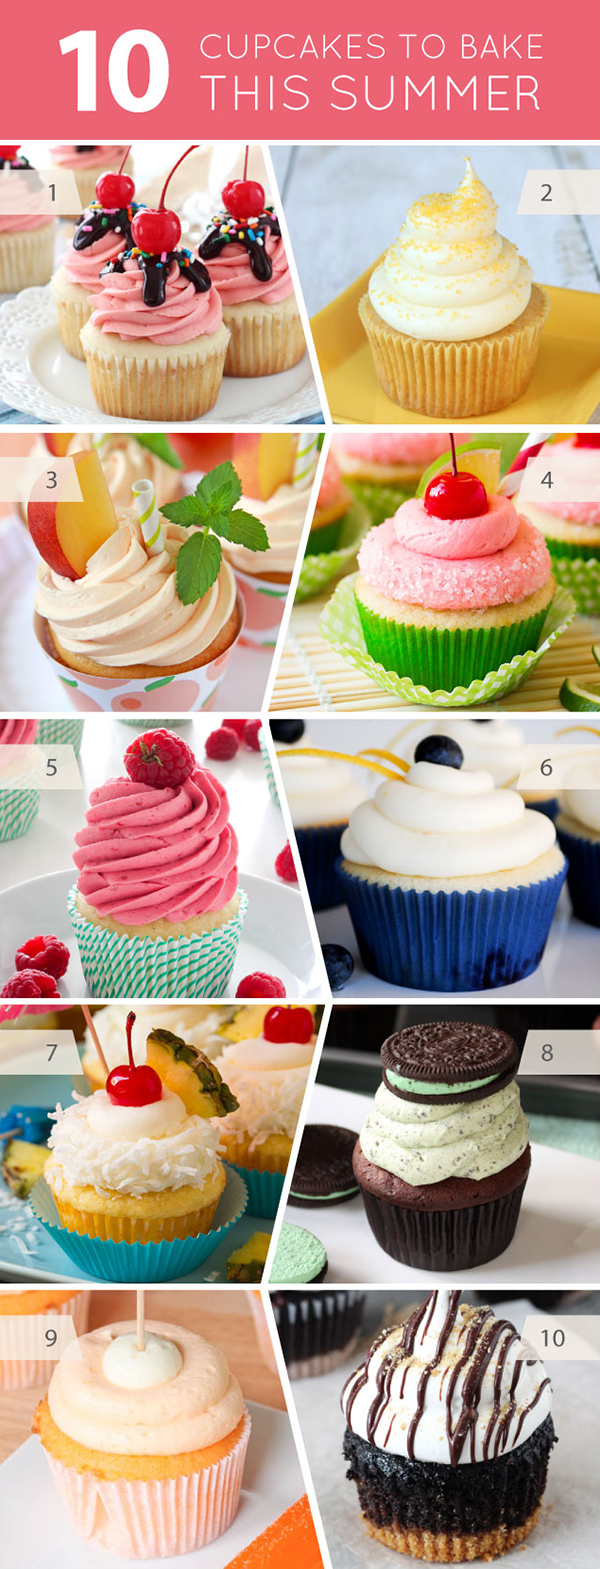 10 Delicious Cupcakes You Should Bake This Summer | on TheCakeBlog.com